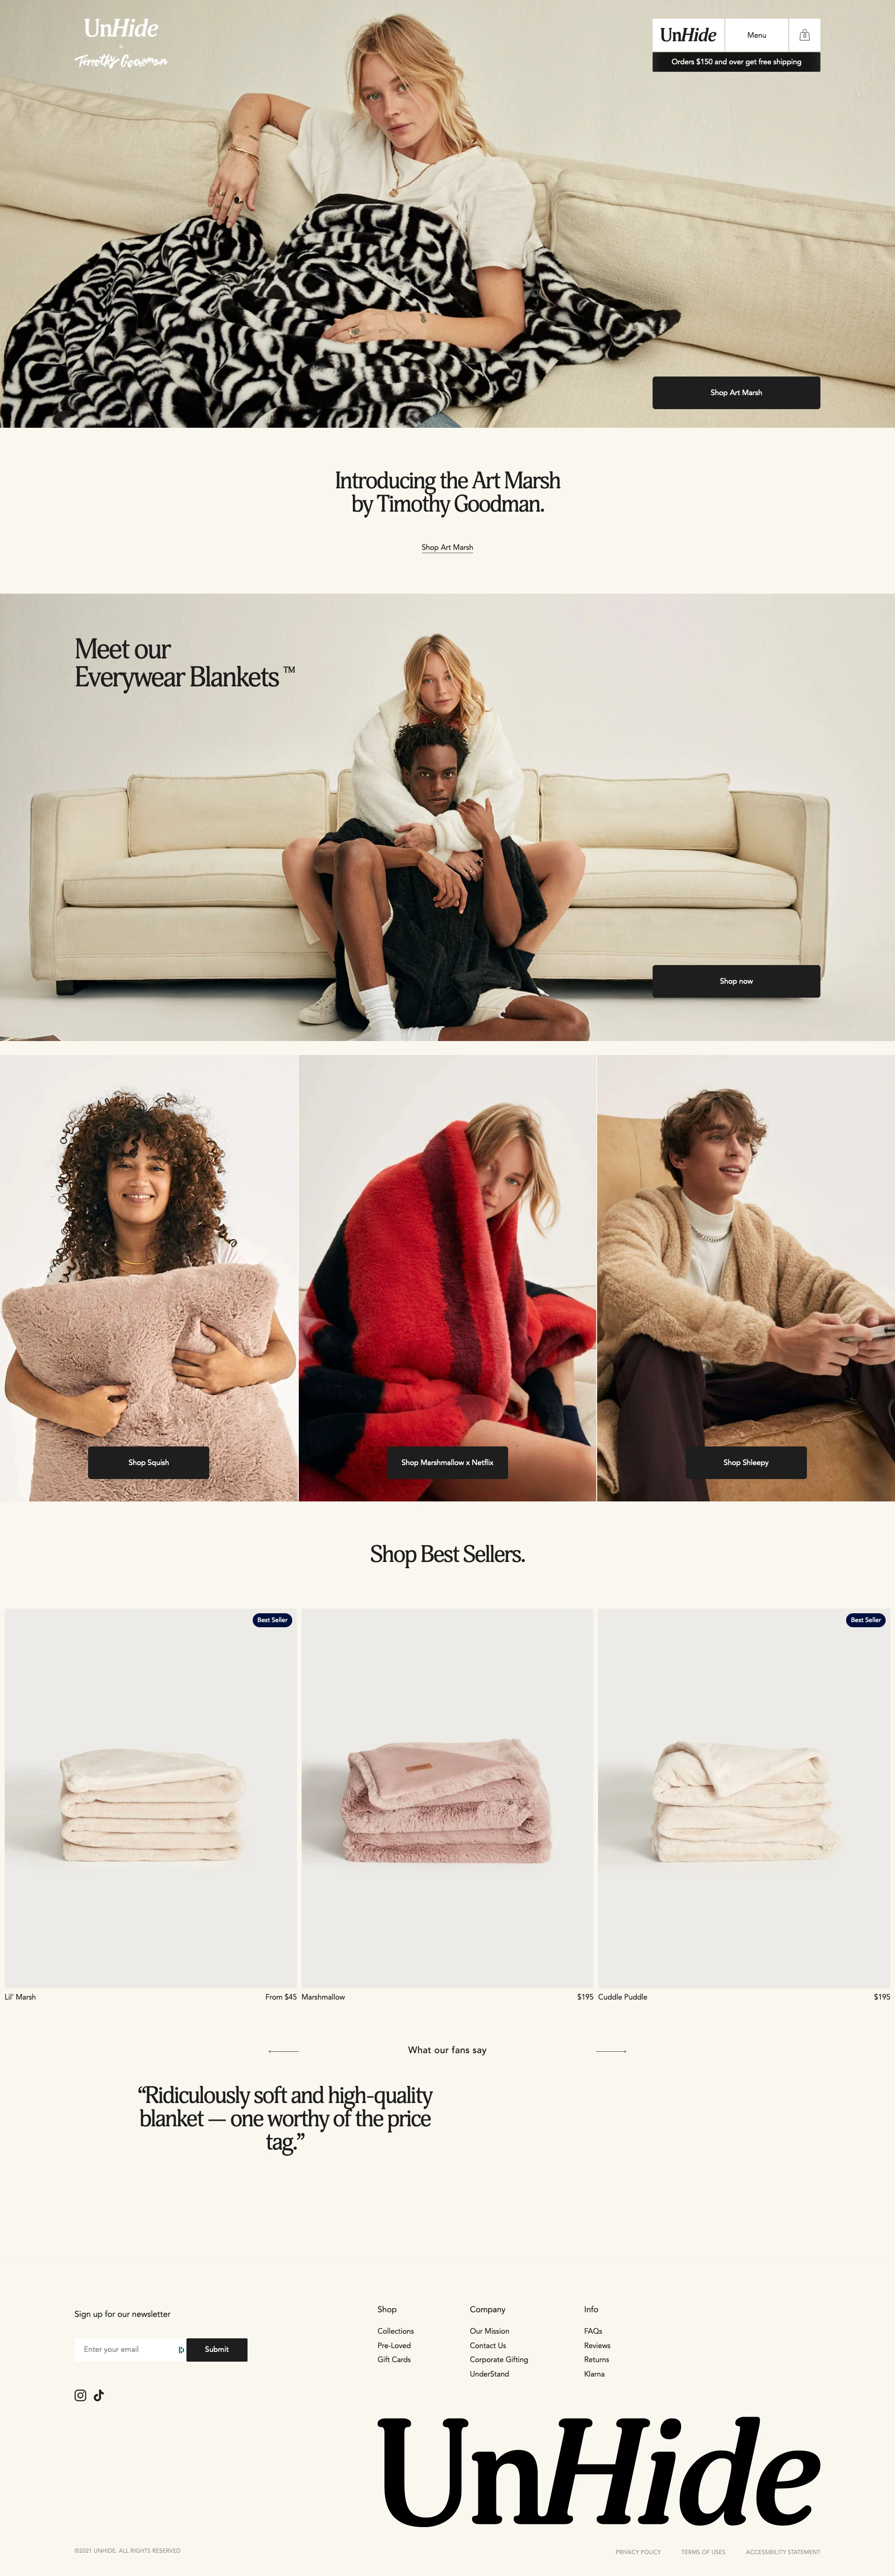 UnHide Landing Page Example: A vegan lifestyle brand for your couch. We remain 100% cruelty-free and strive to bring more sustainable options to every home. Our vegan fur is made in the most sustainable and ethical factories around the world.